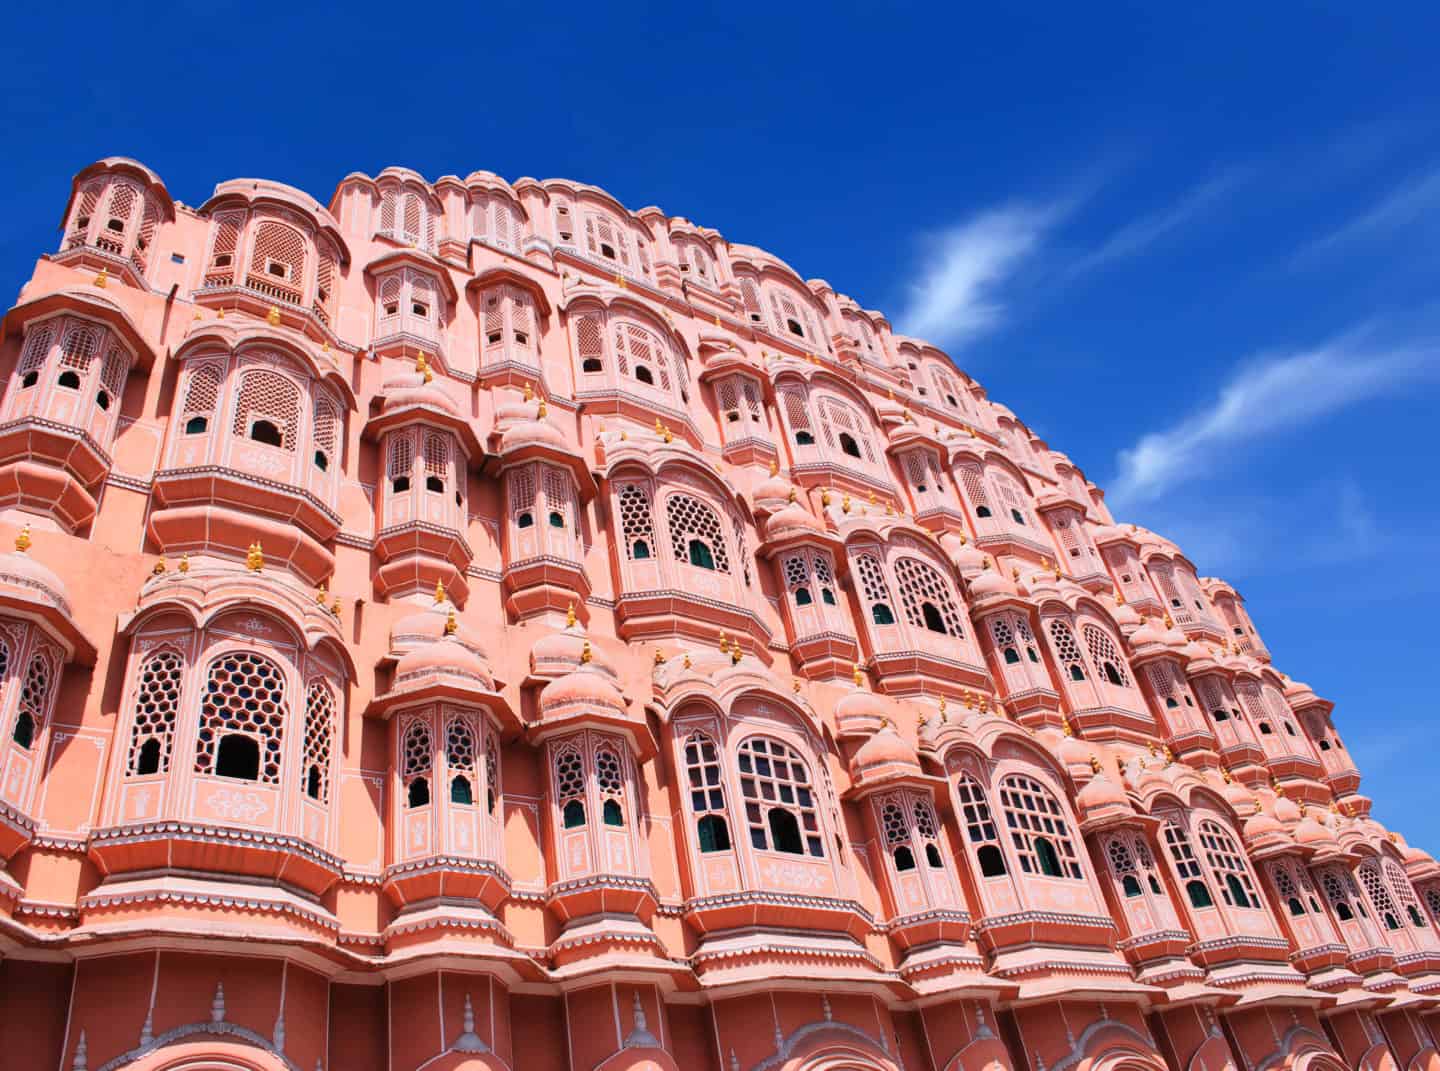 Places to visit in Jaipur | Hawa Mahal, the Palace of Winds, Jaipur, Rajasthan, India.